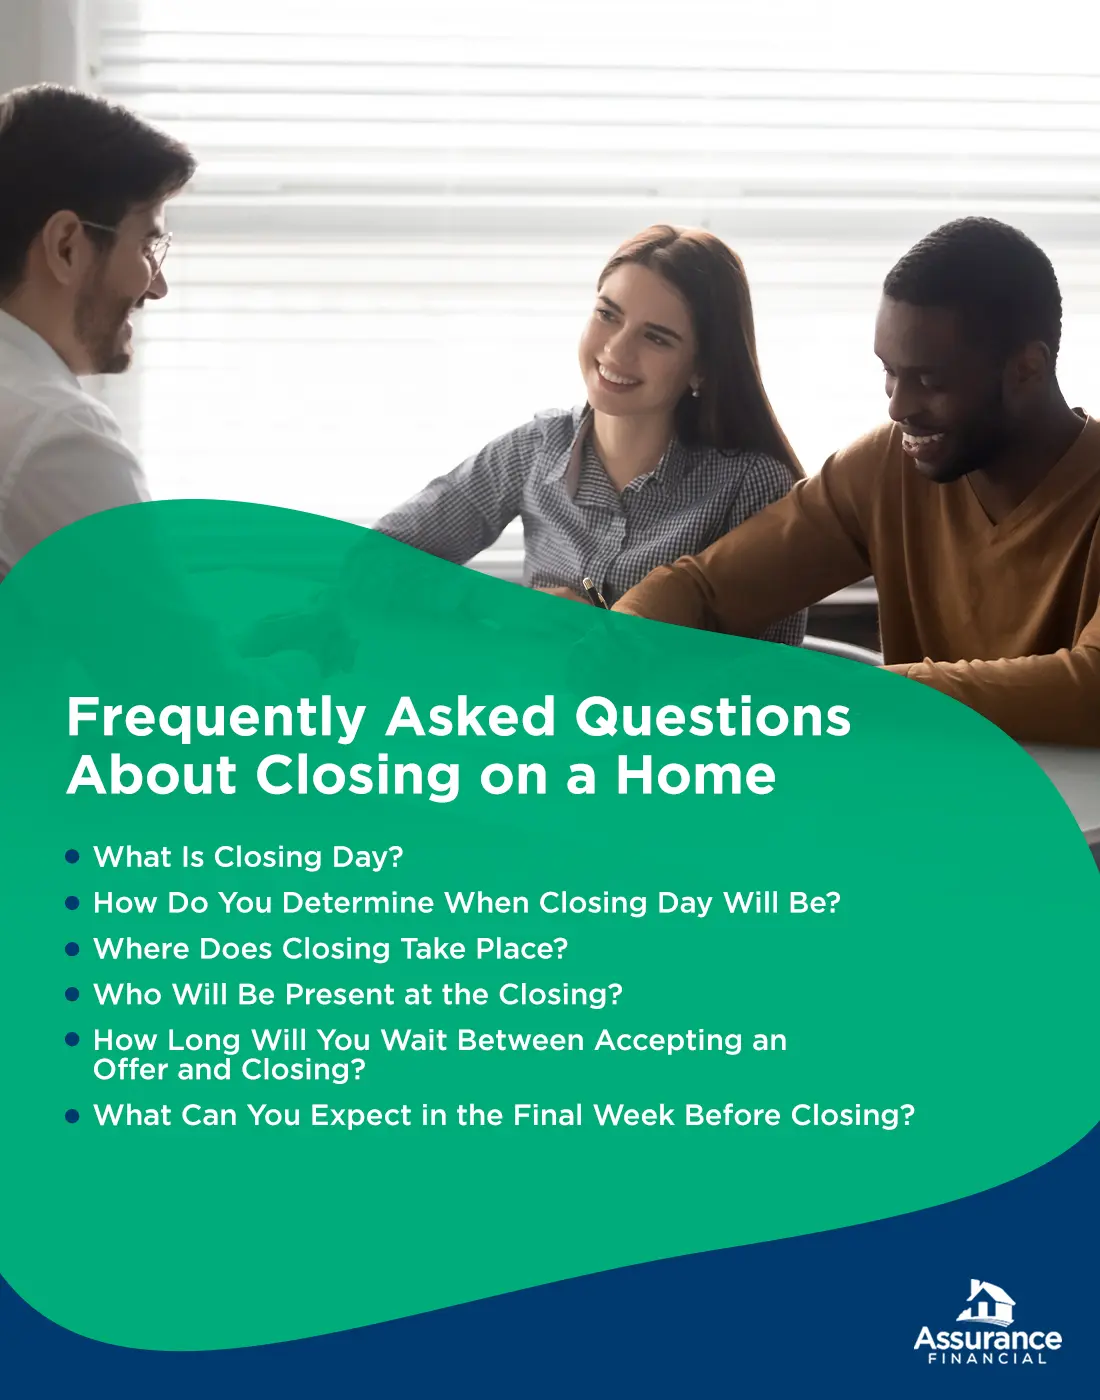 09-Frequently-Asked-Questions-About-Closing-on-a-Home